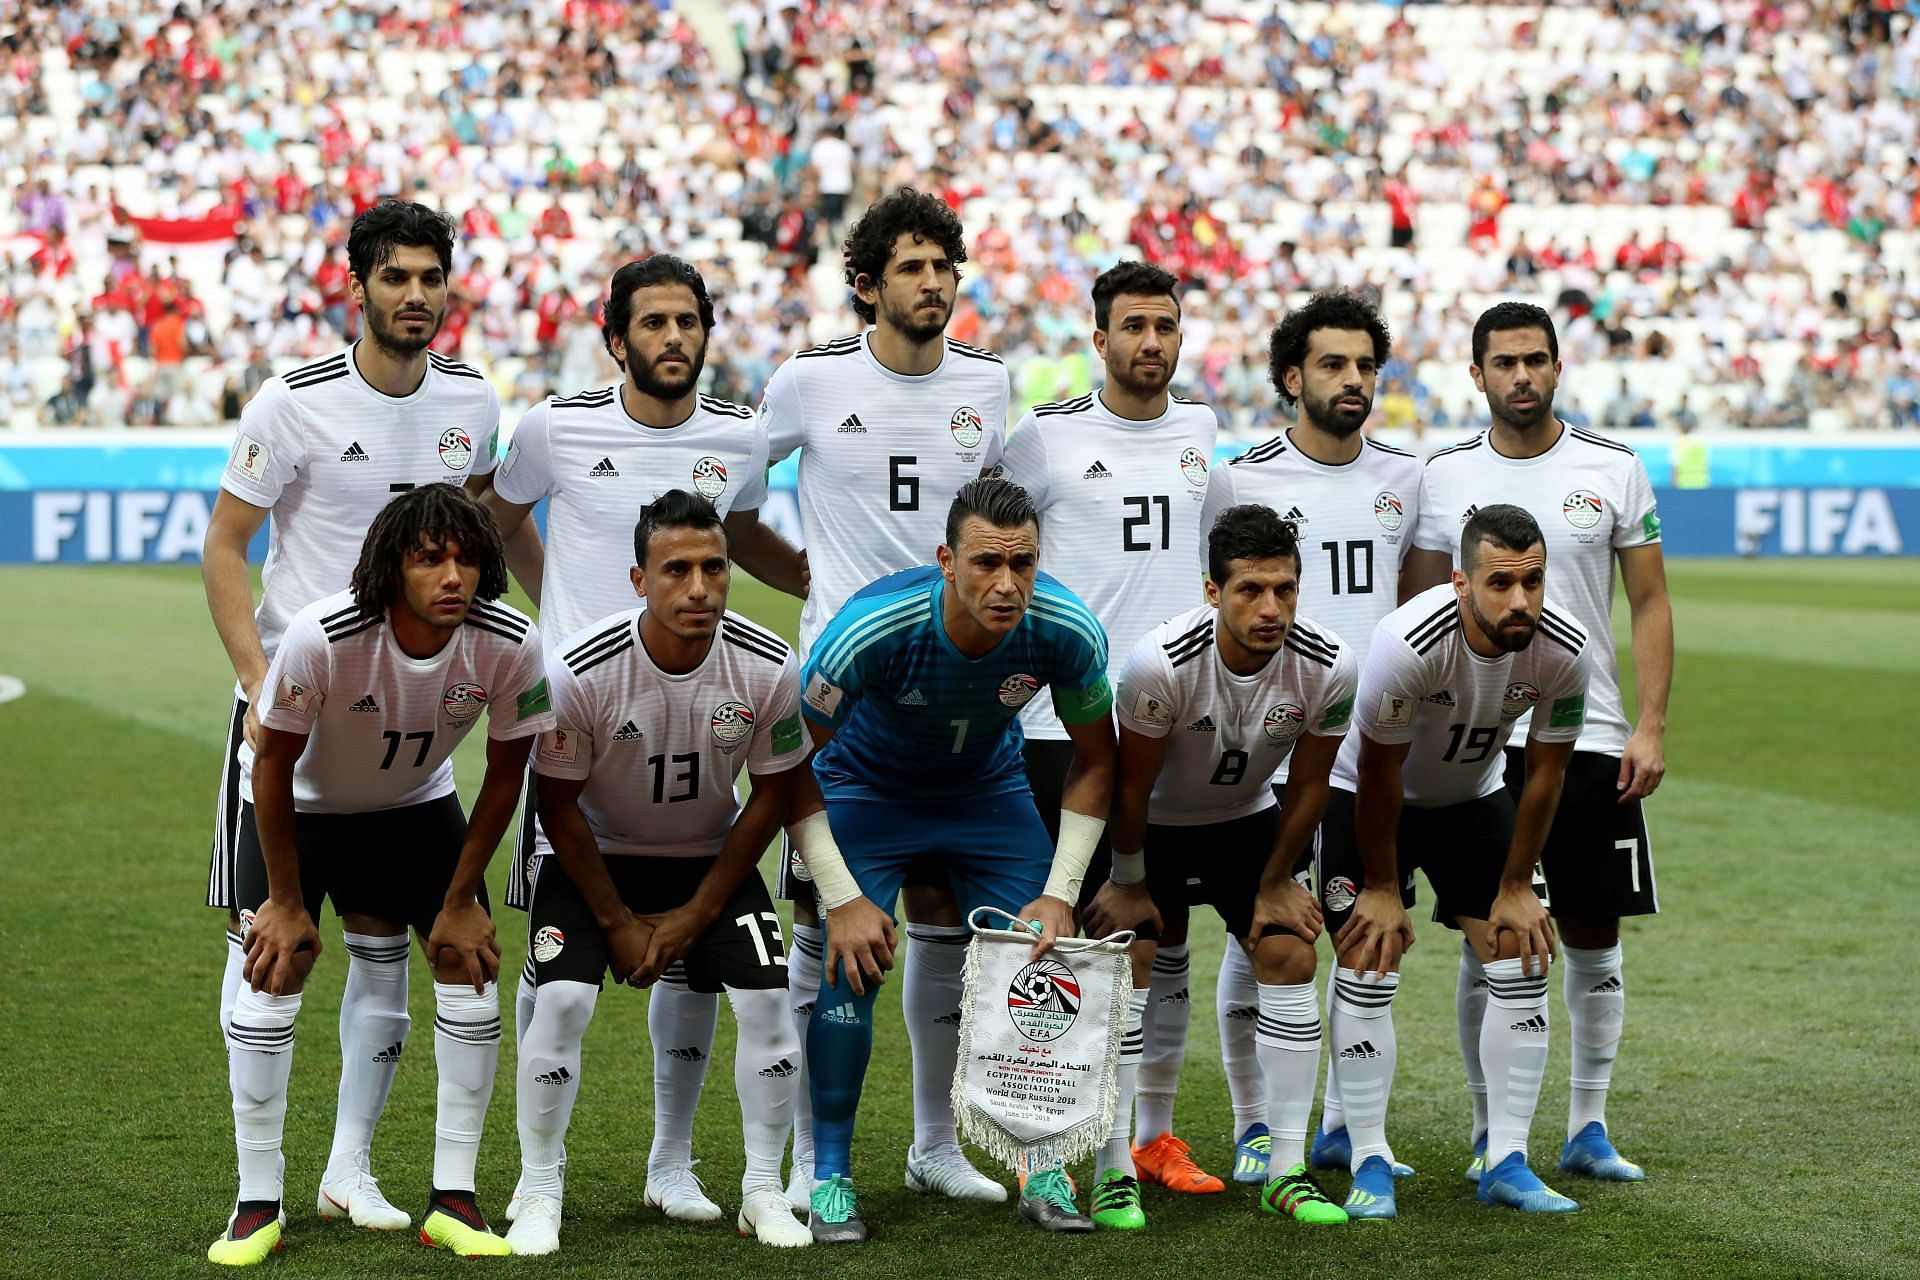 Egypt striking a team pose at the 2018 FIFA World Cup